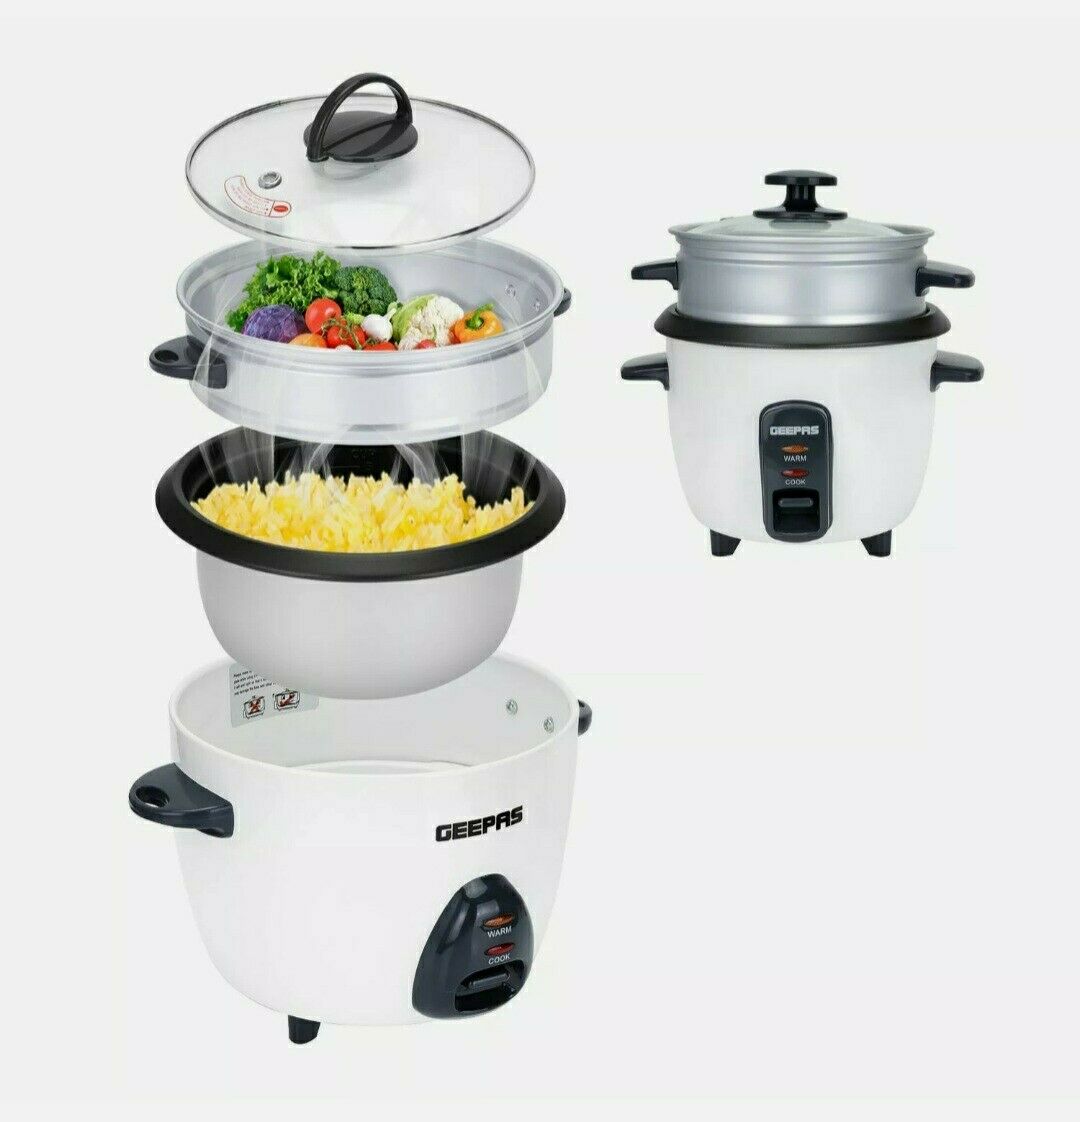 Geepas Automatic 2.2 L Rice Cooker Steamer InnerPot Non Stick Electric Keep Warm